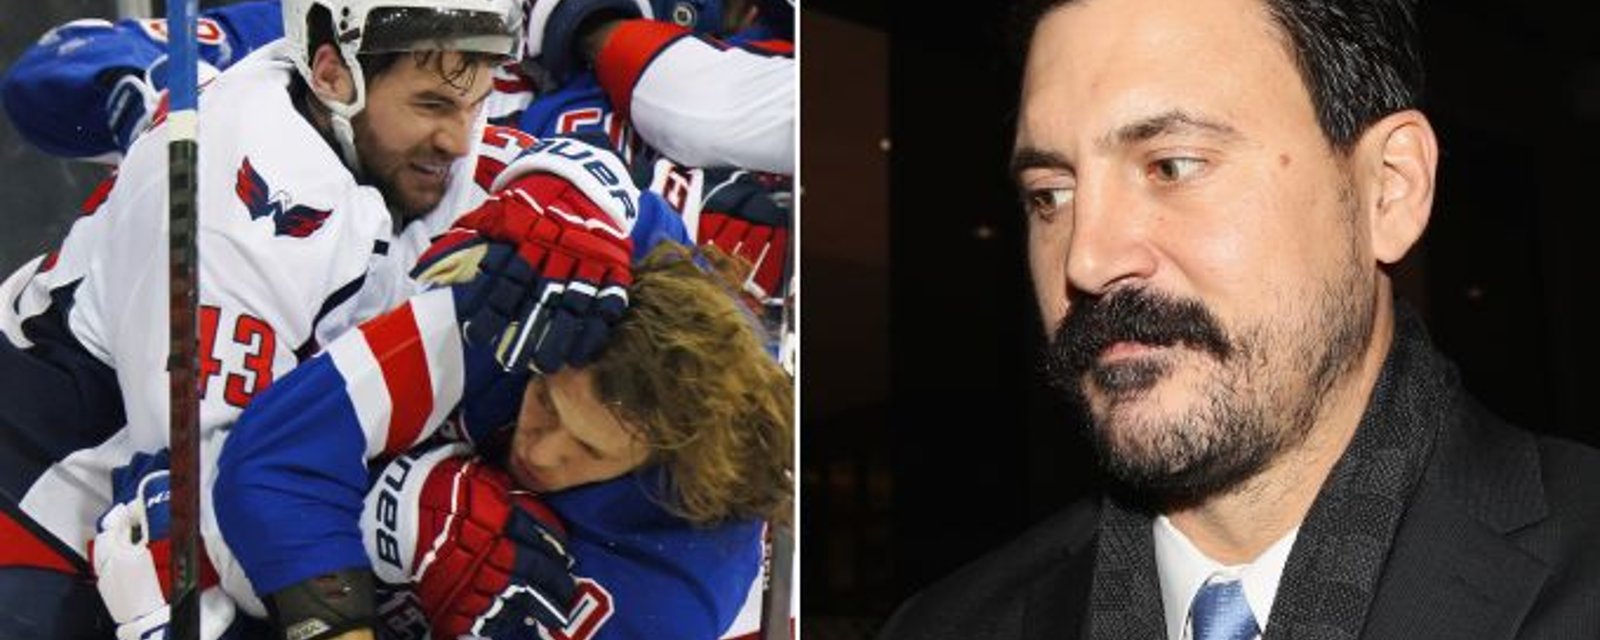 Rangers “will be fined an enormous amount of money” for statement on Wilson and Parros